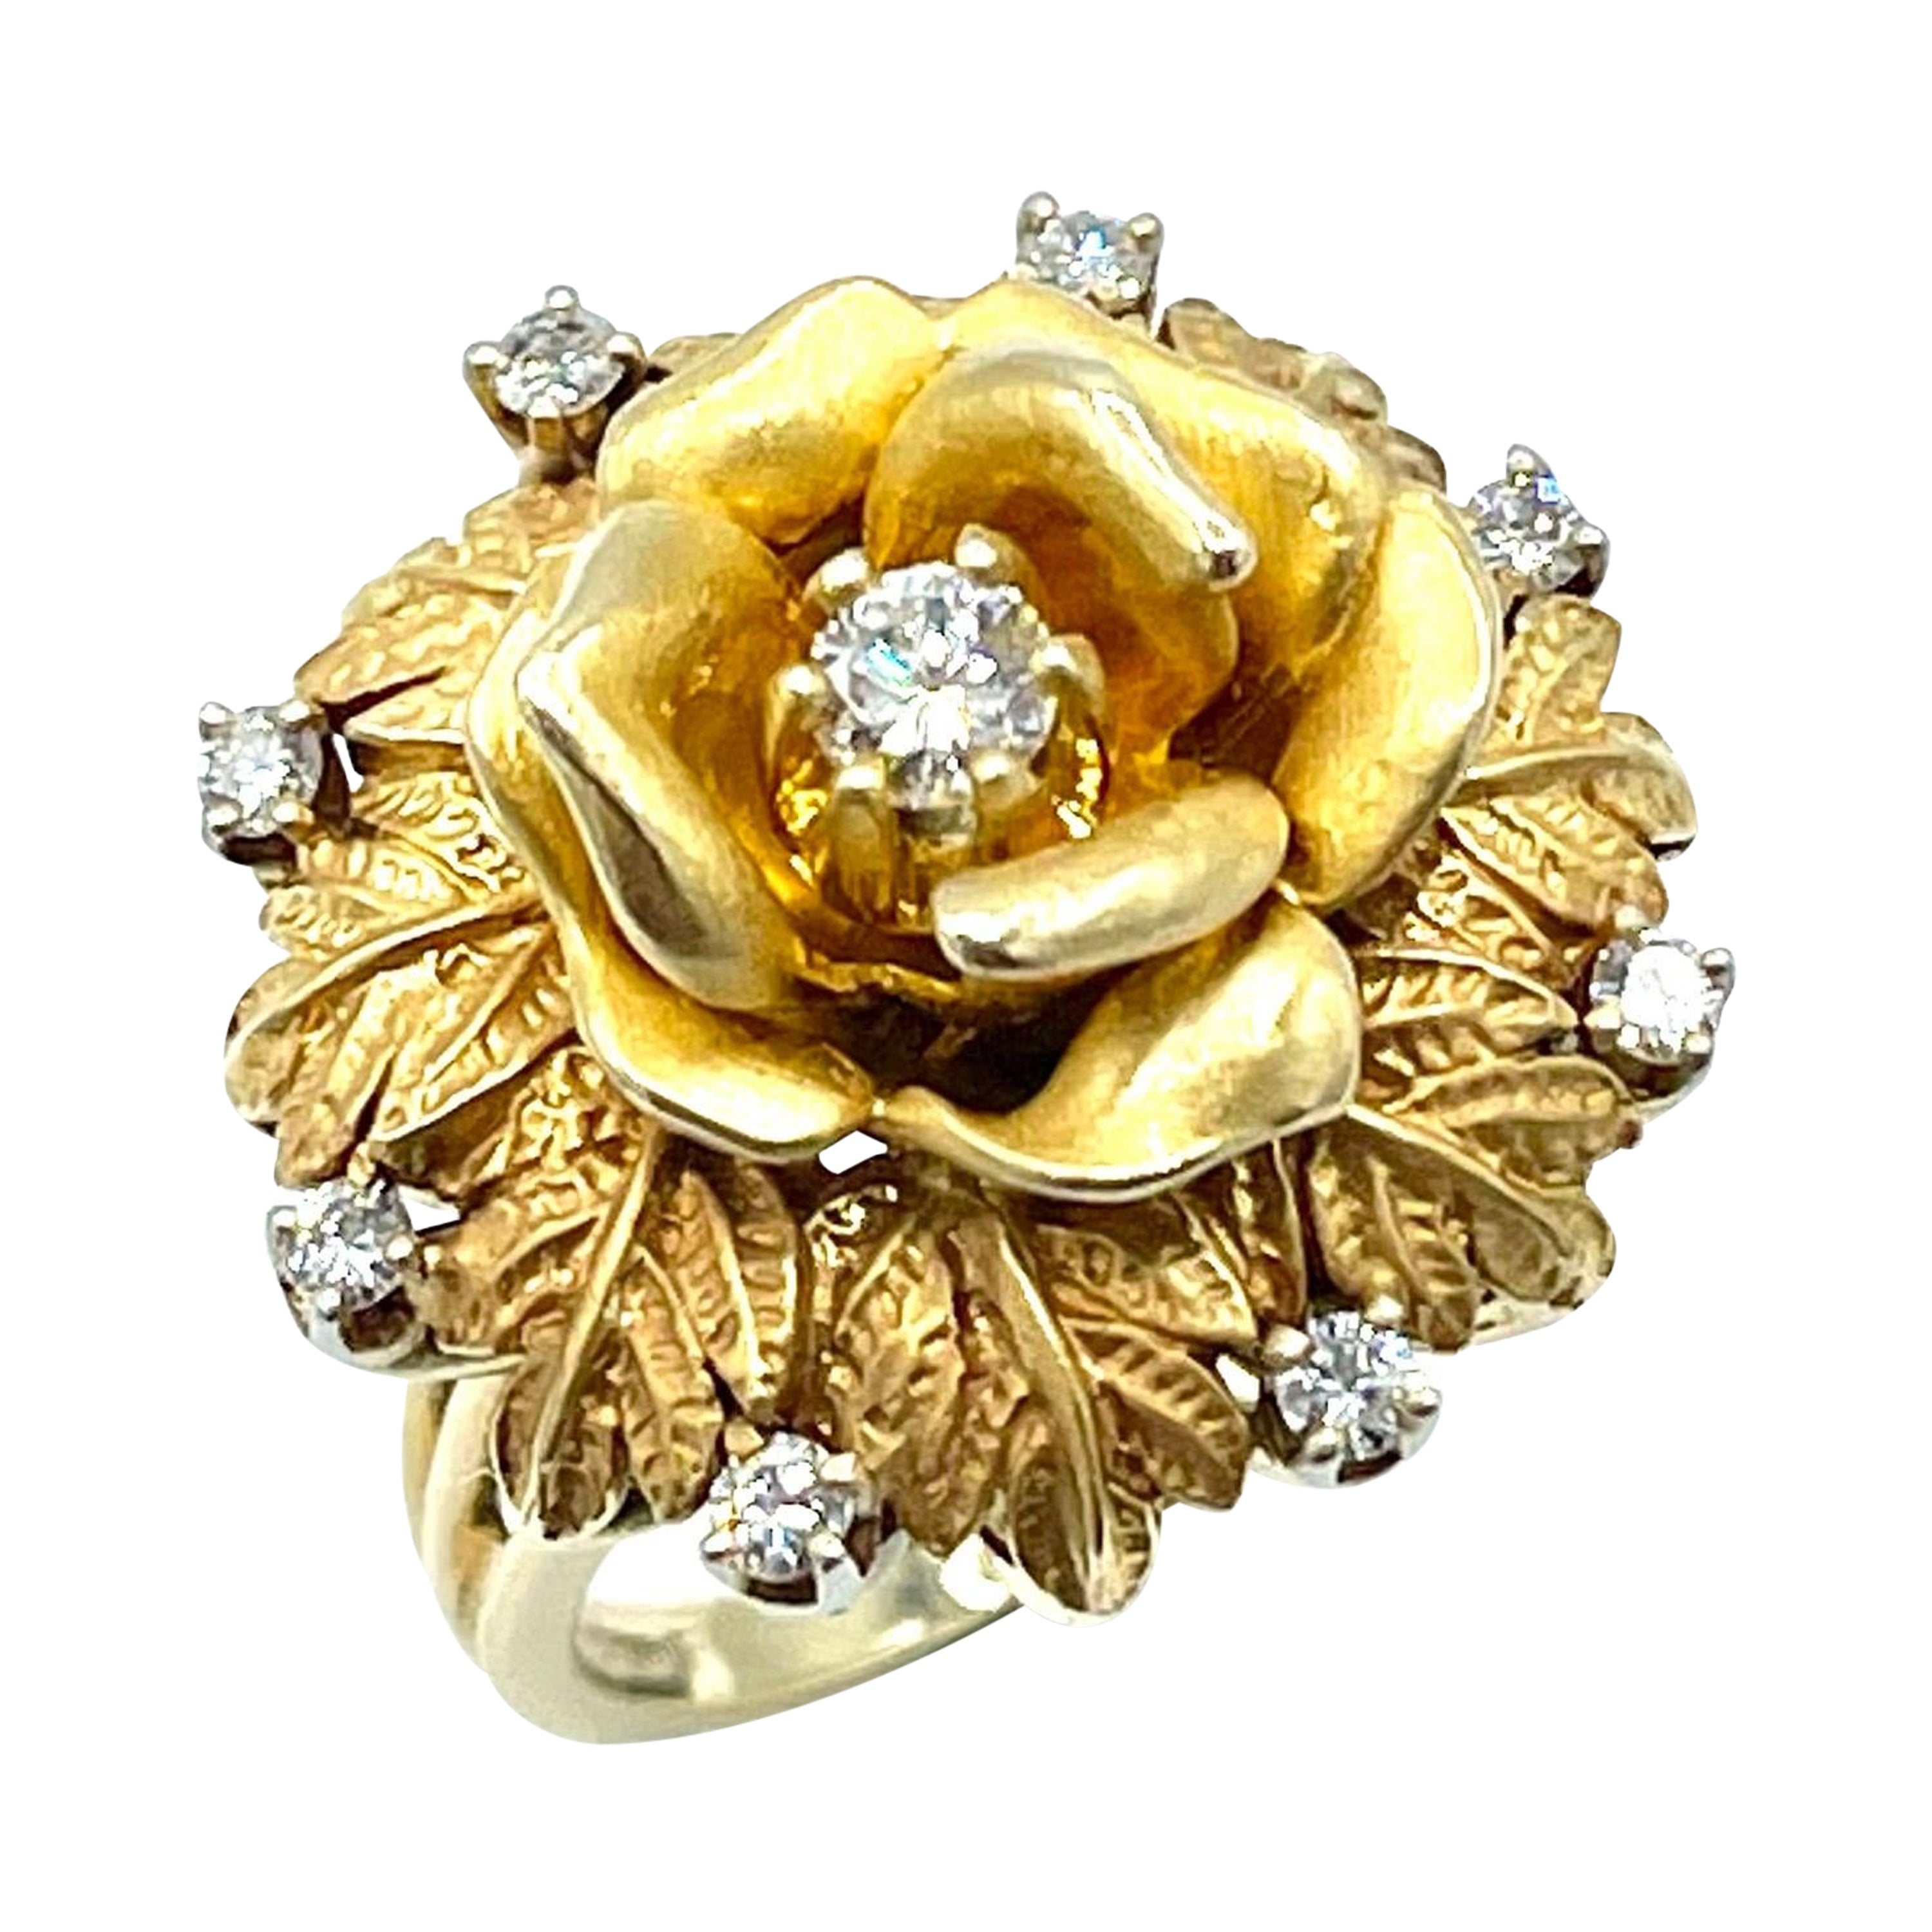 0.36 Carat Round Brilliant Diamond and Textured 18K Gold Flower Cocktail Ring